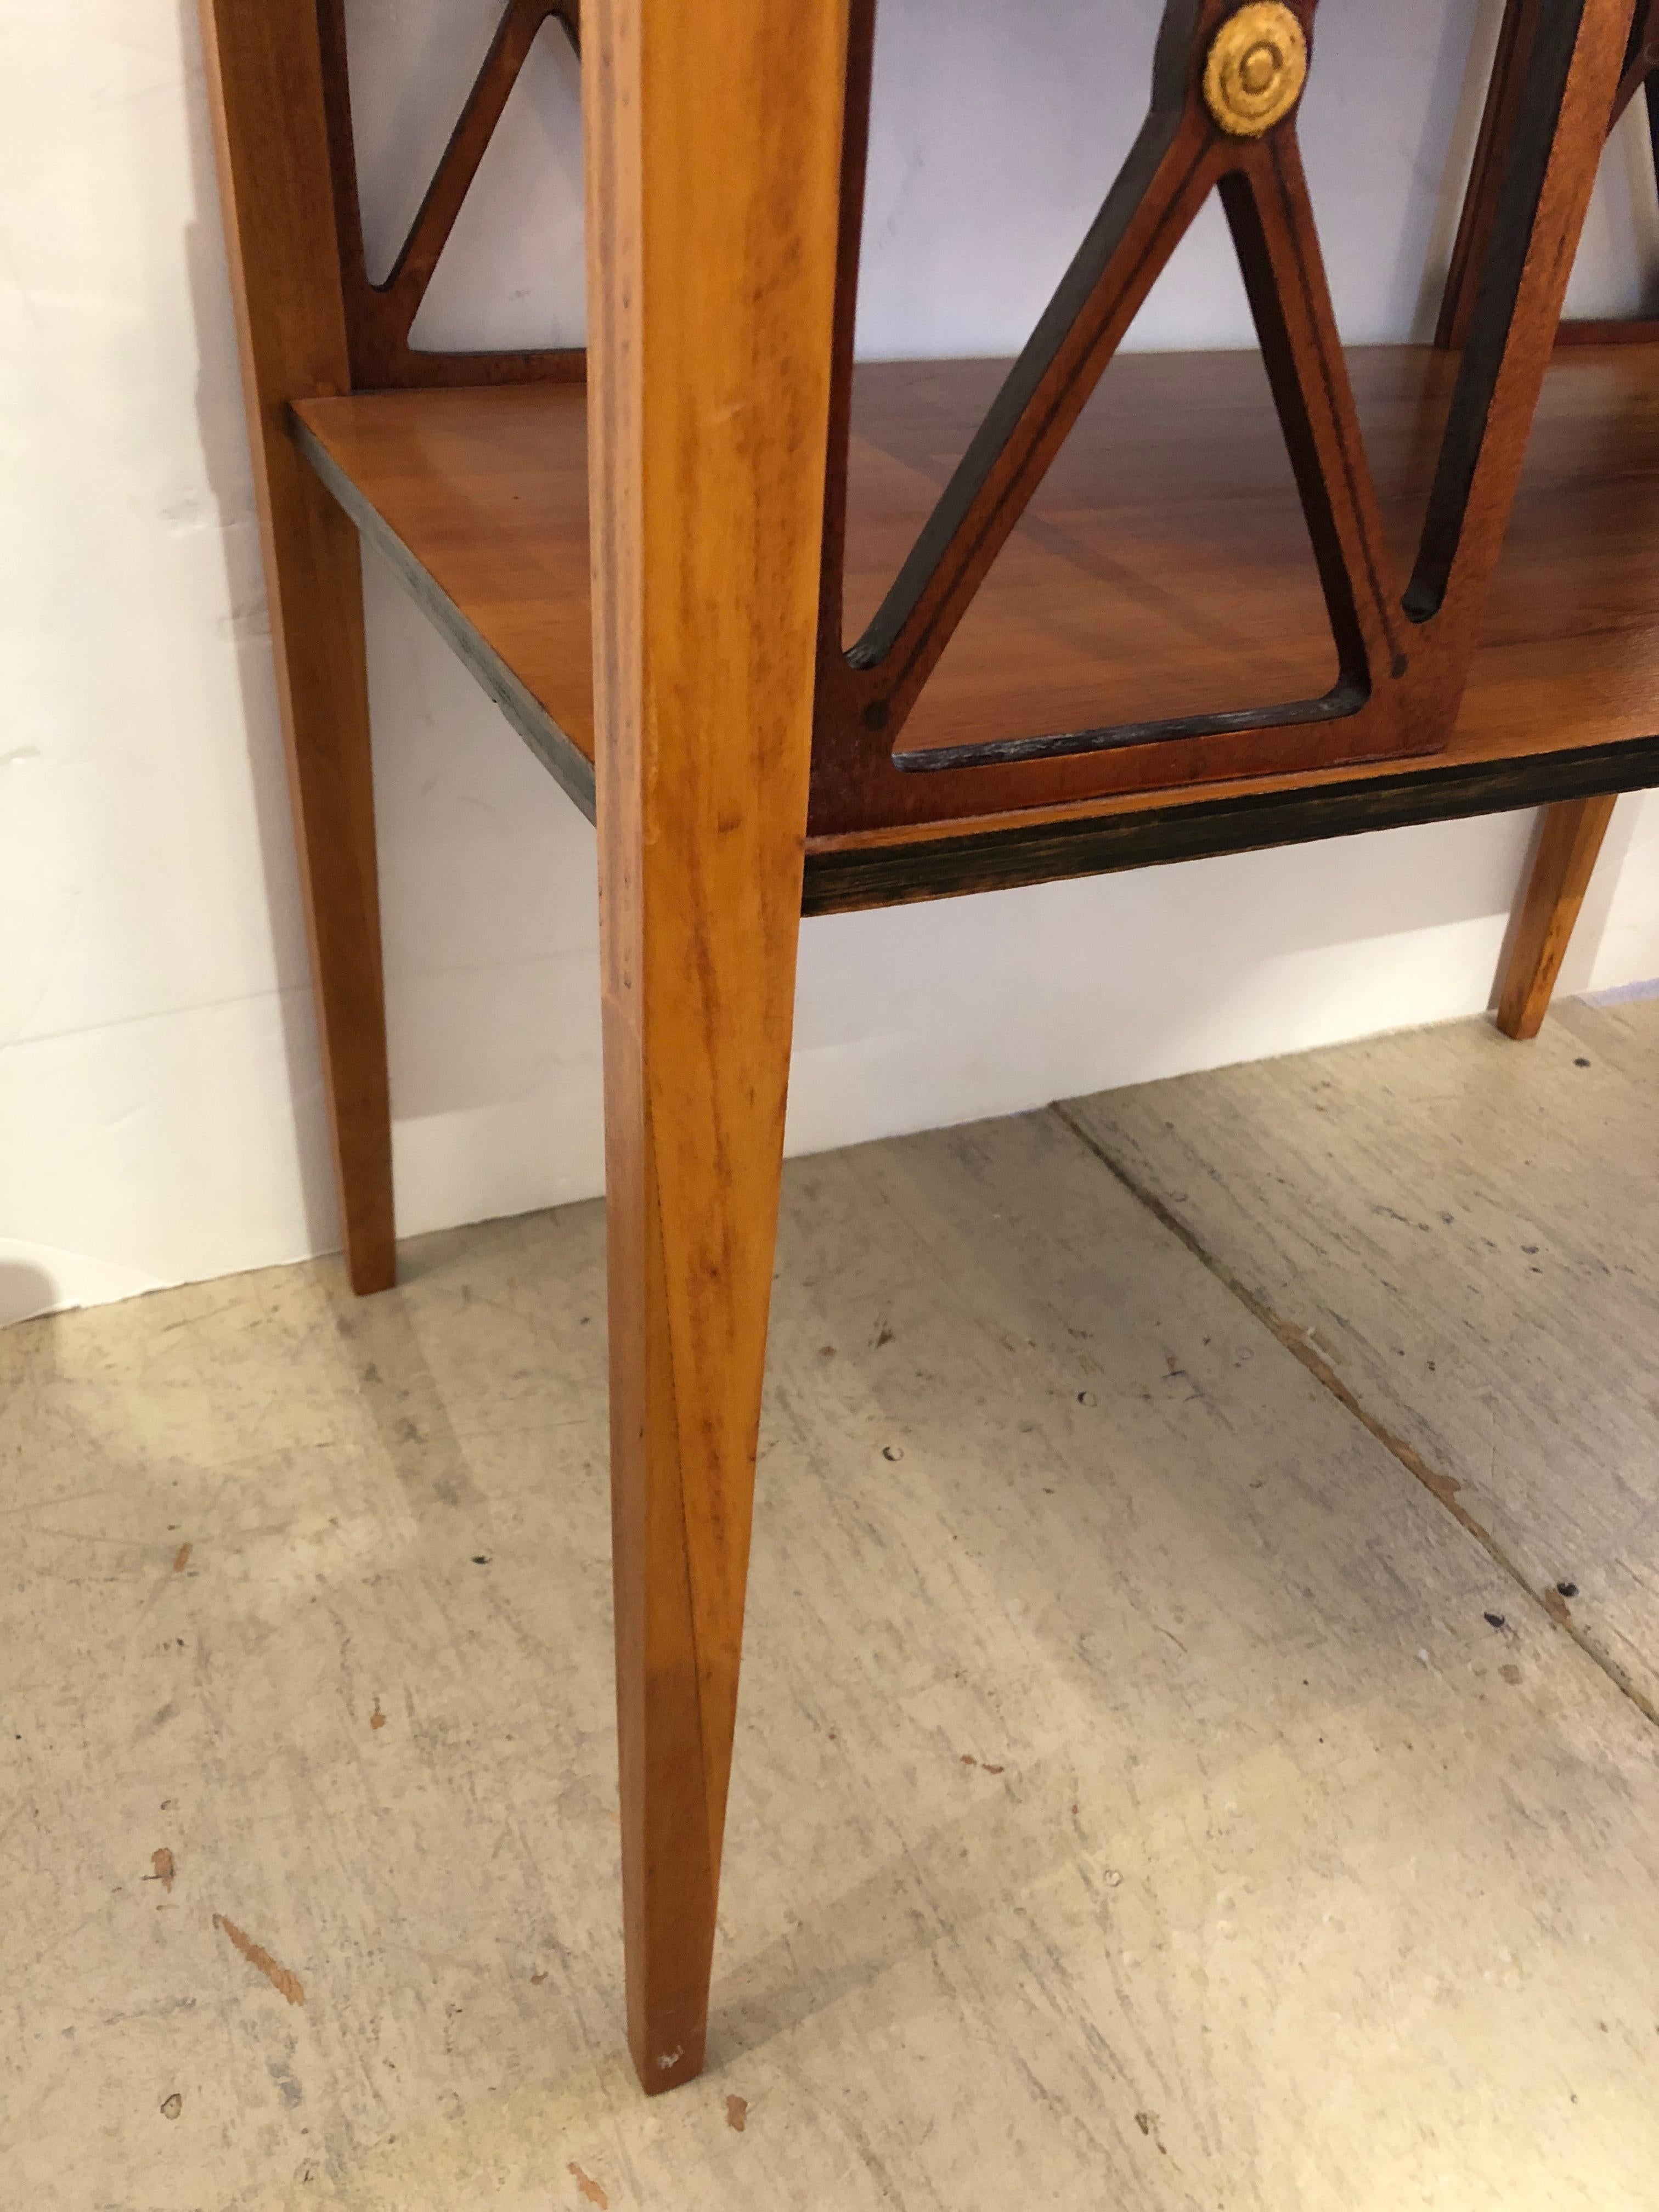 Charming Neoclassical Style Side Table with Drawer In Excellent Condition For Sale In Hopewell, NJ